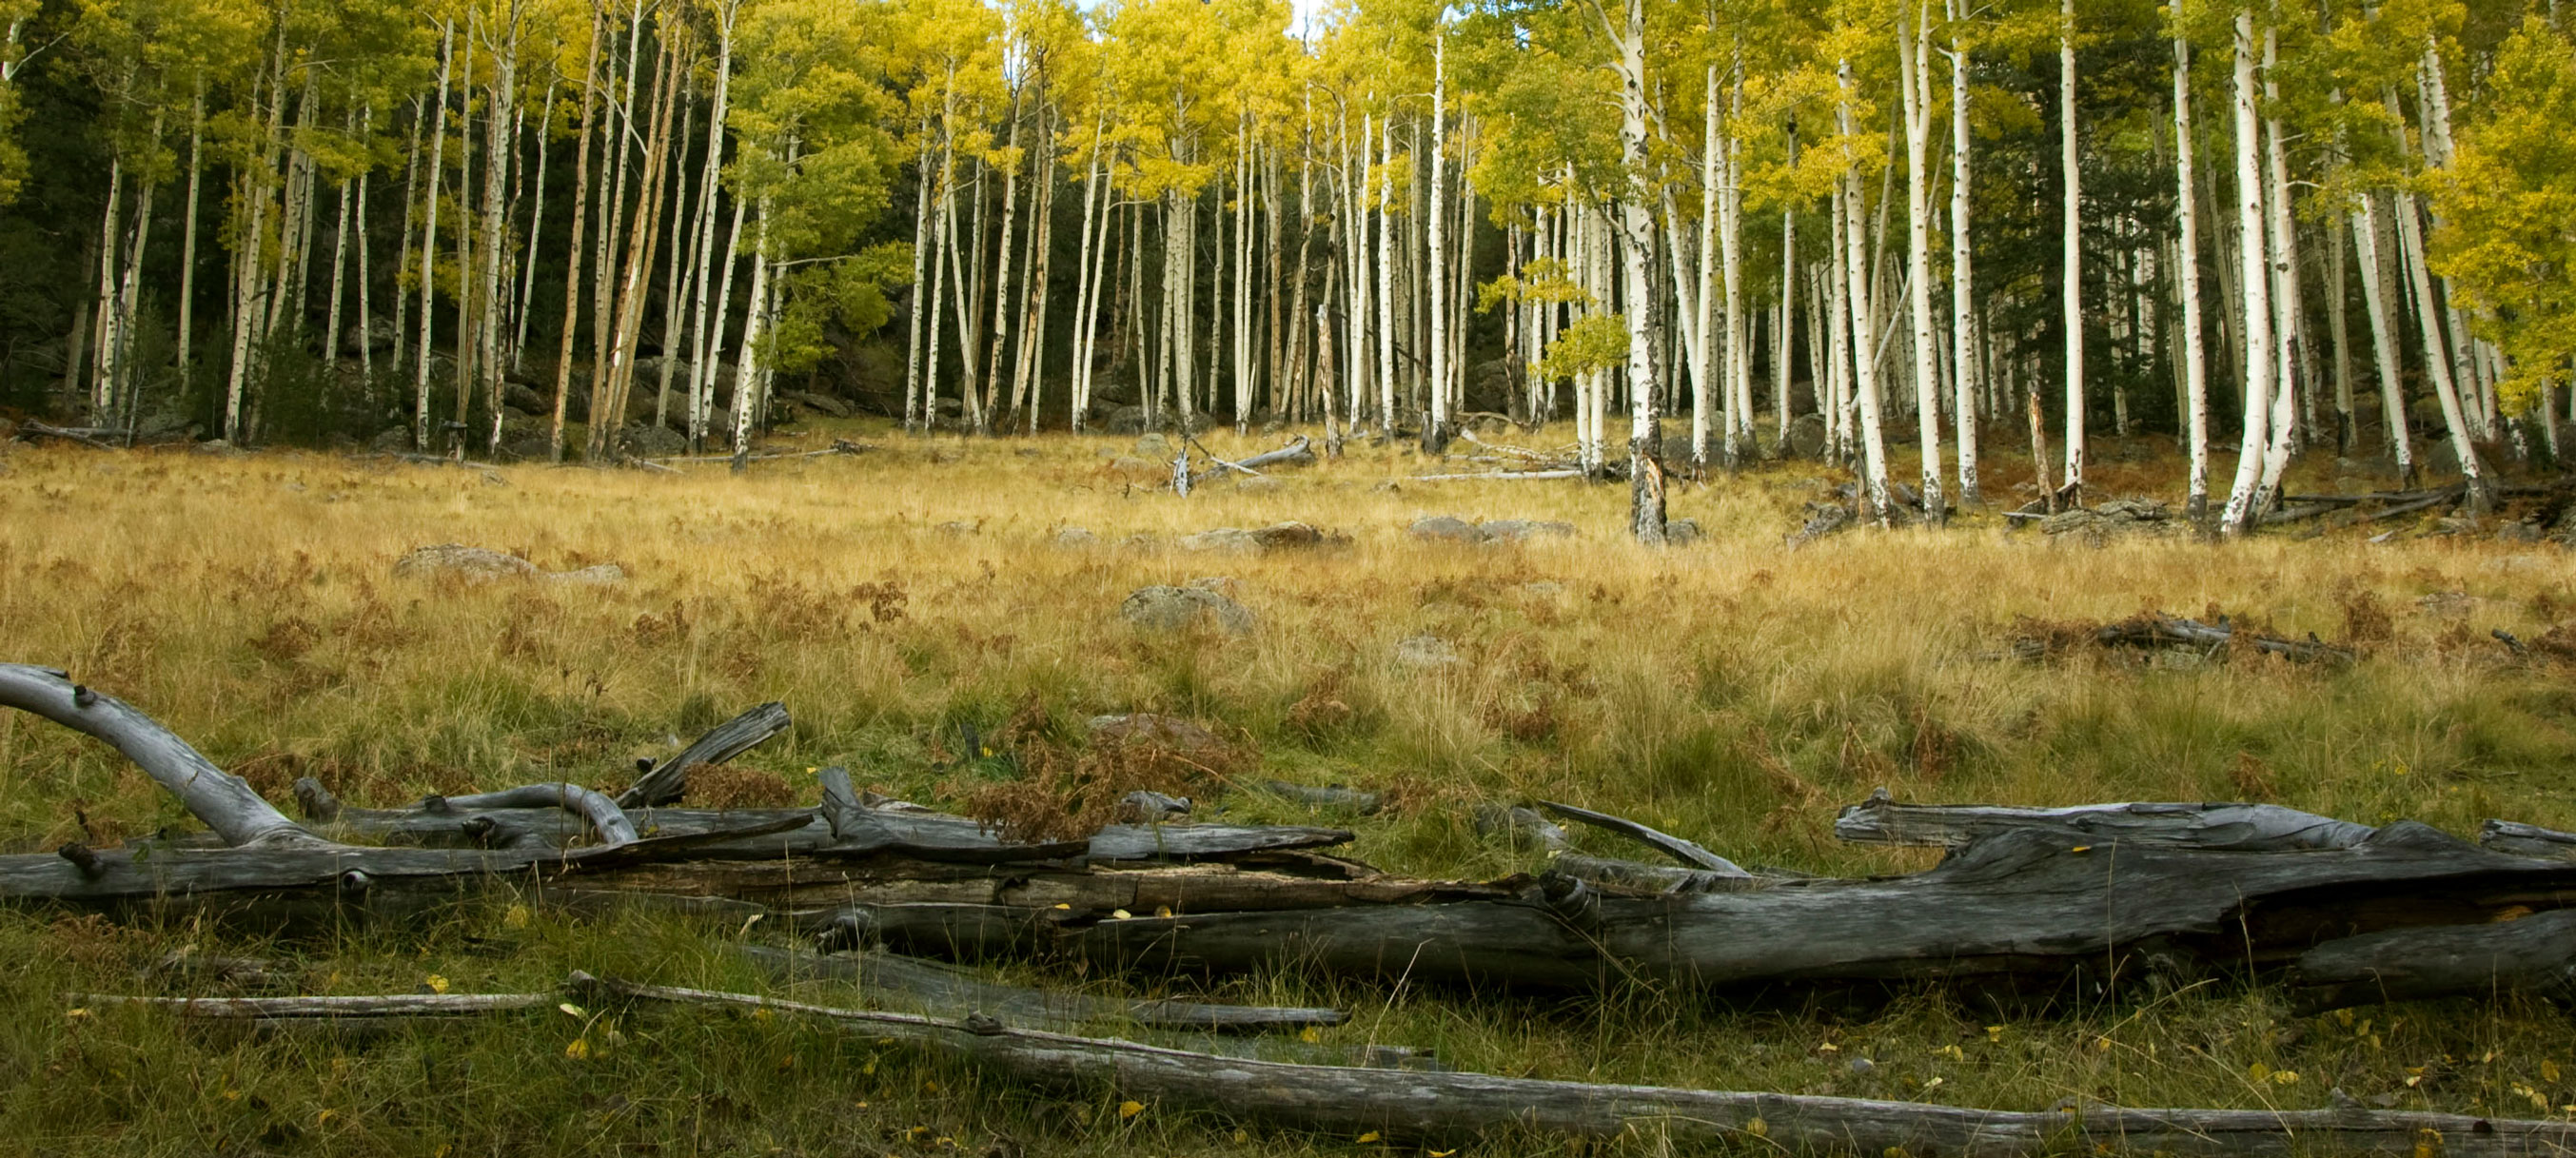 Aspen trees with fall color in the Kachina Peaks Wilderness of the San Francisco Peaks, northern Arizona